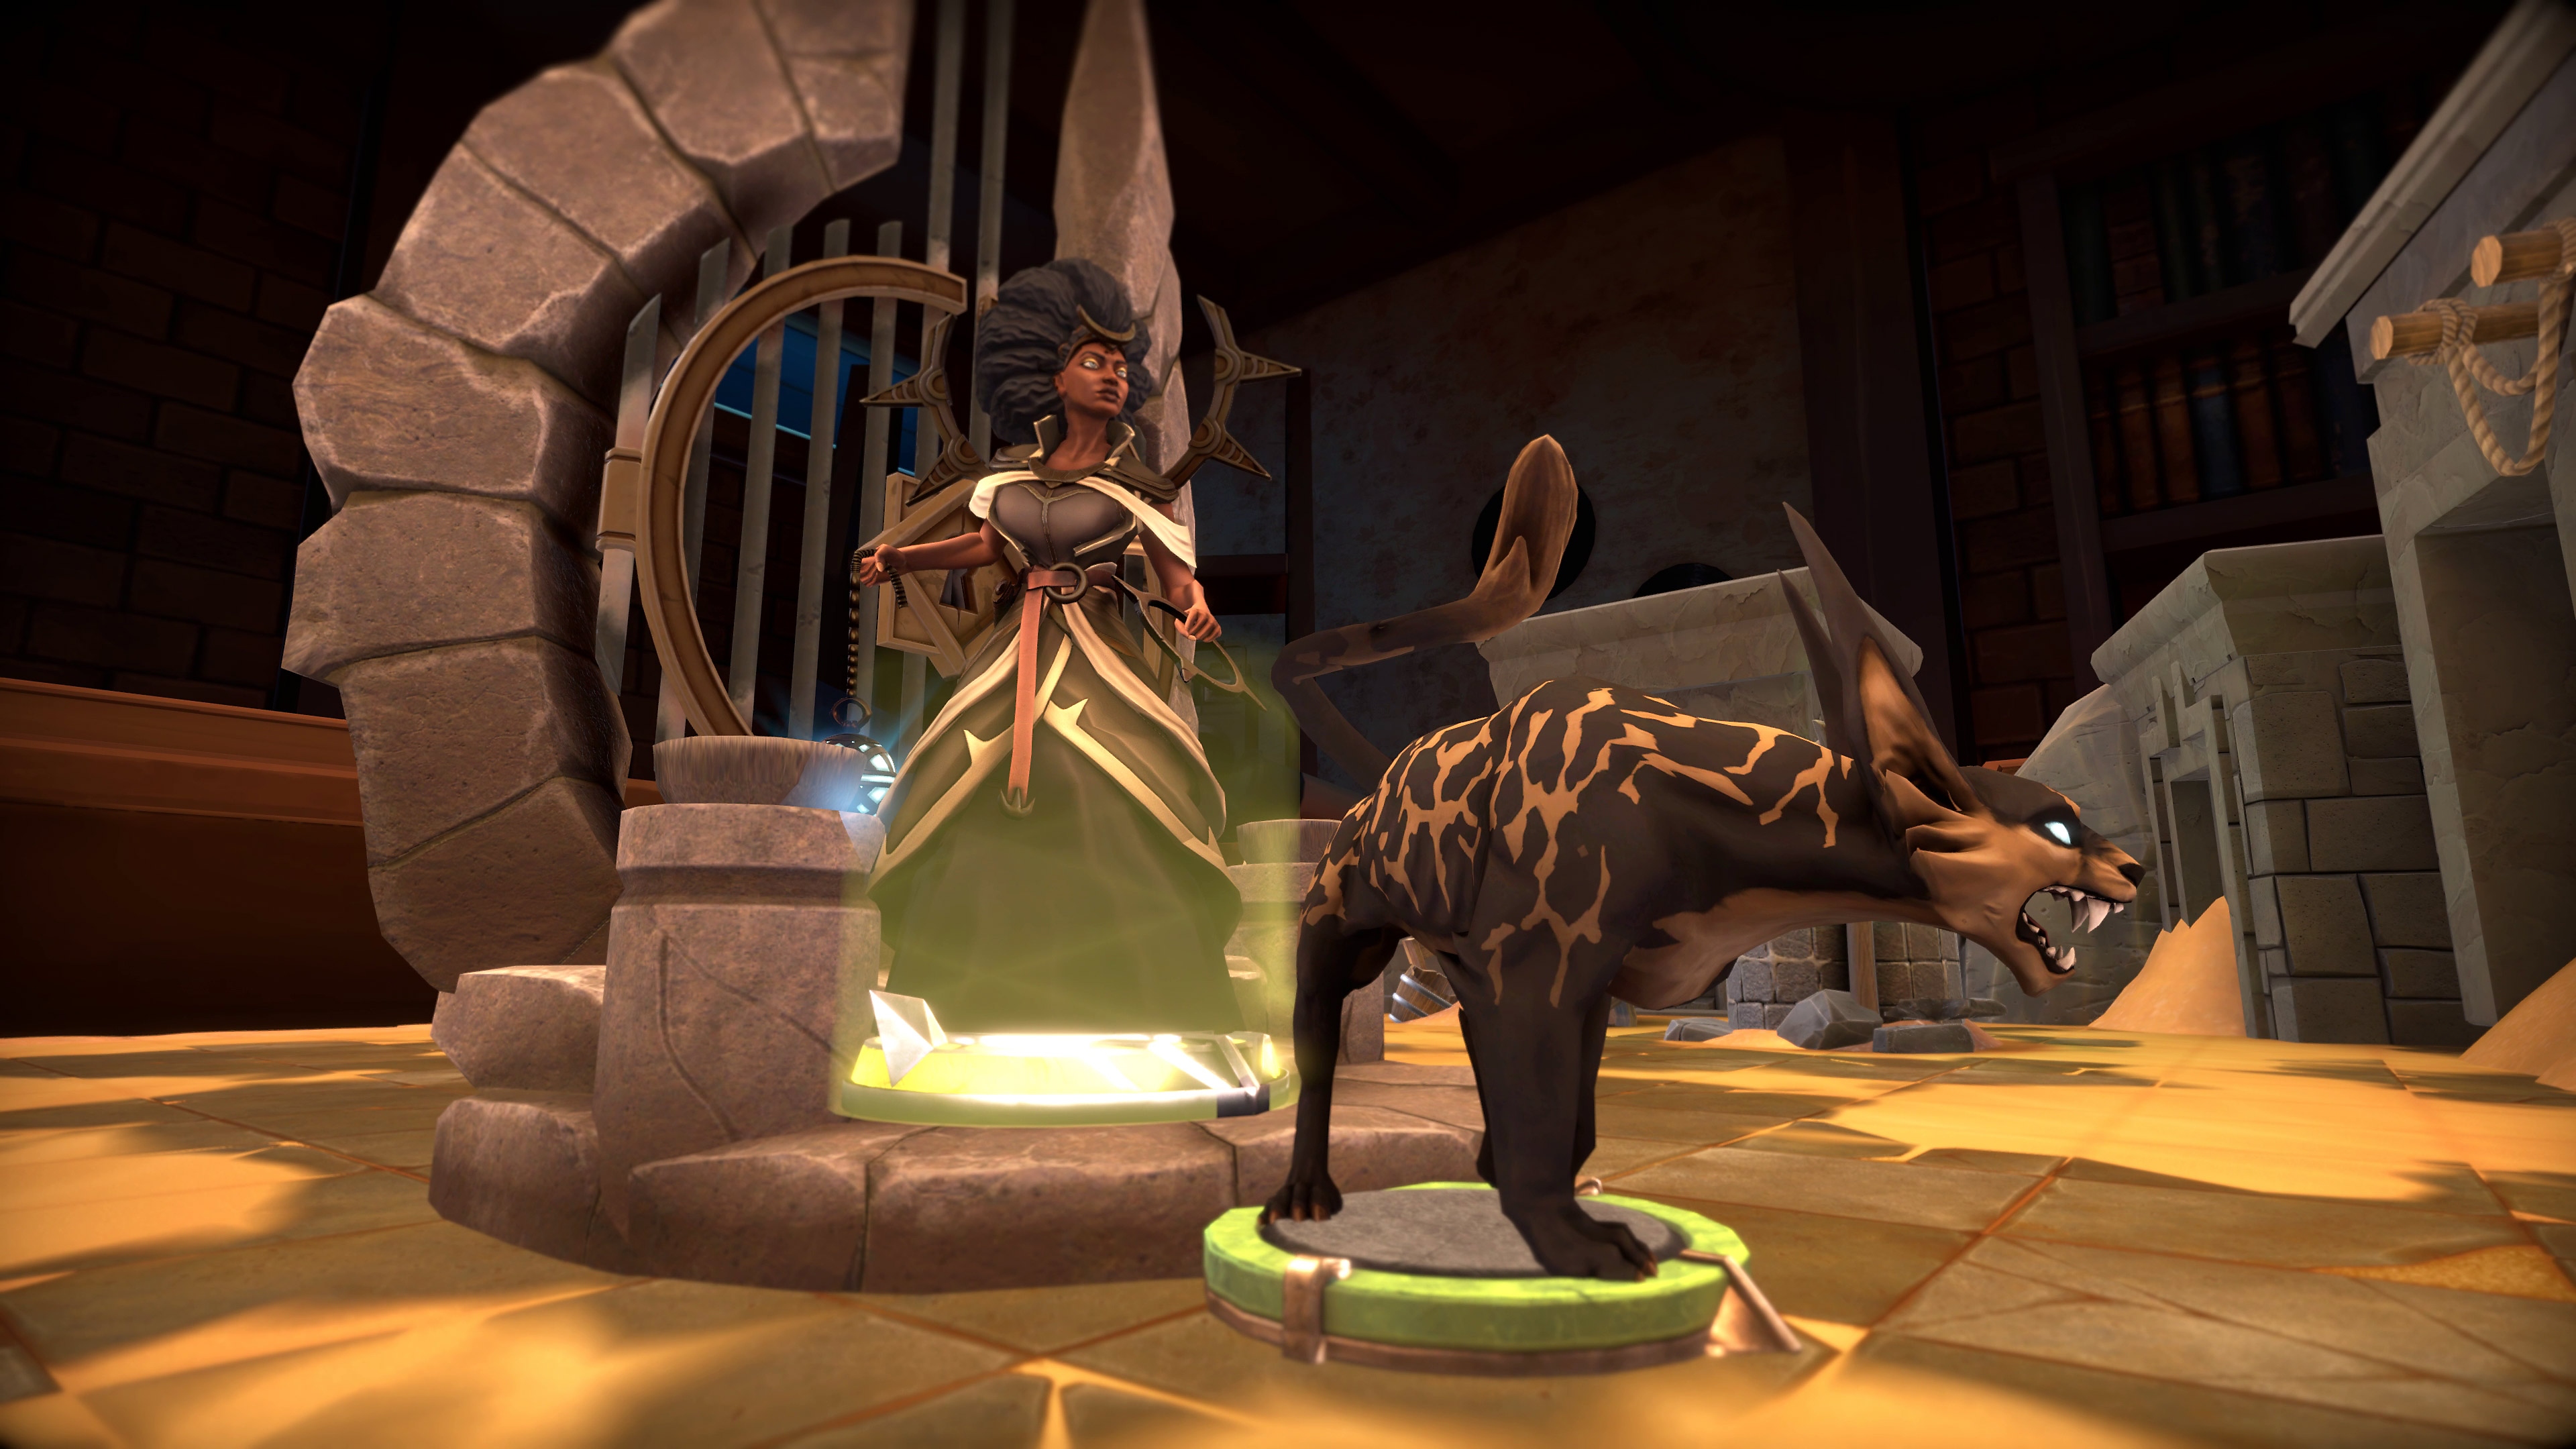 Demeo screenshot showing a snarling hyena-like creature ready to attack